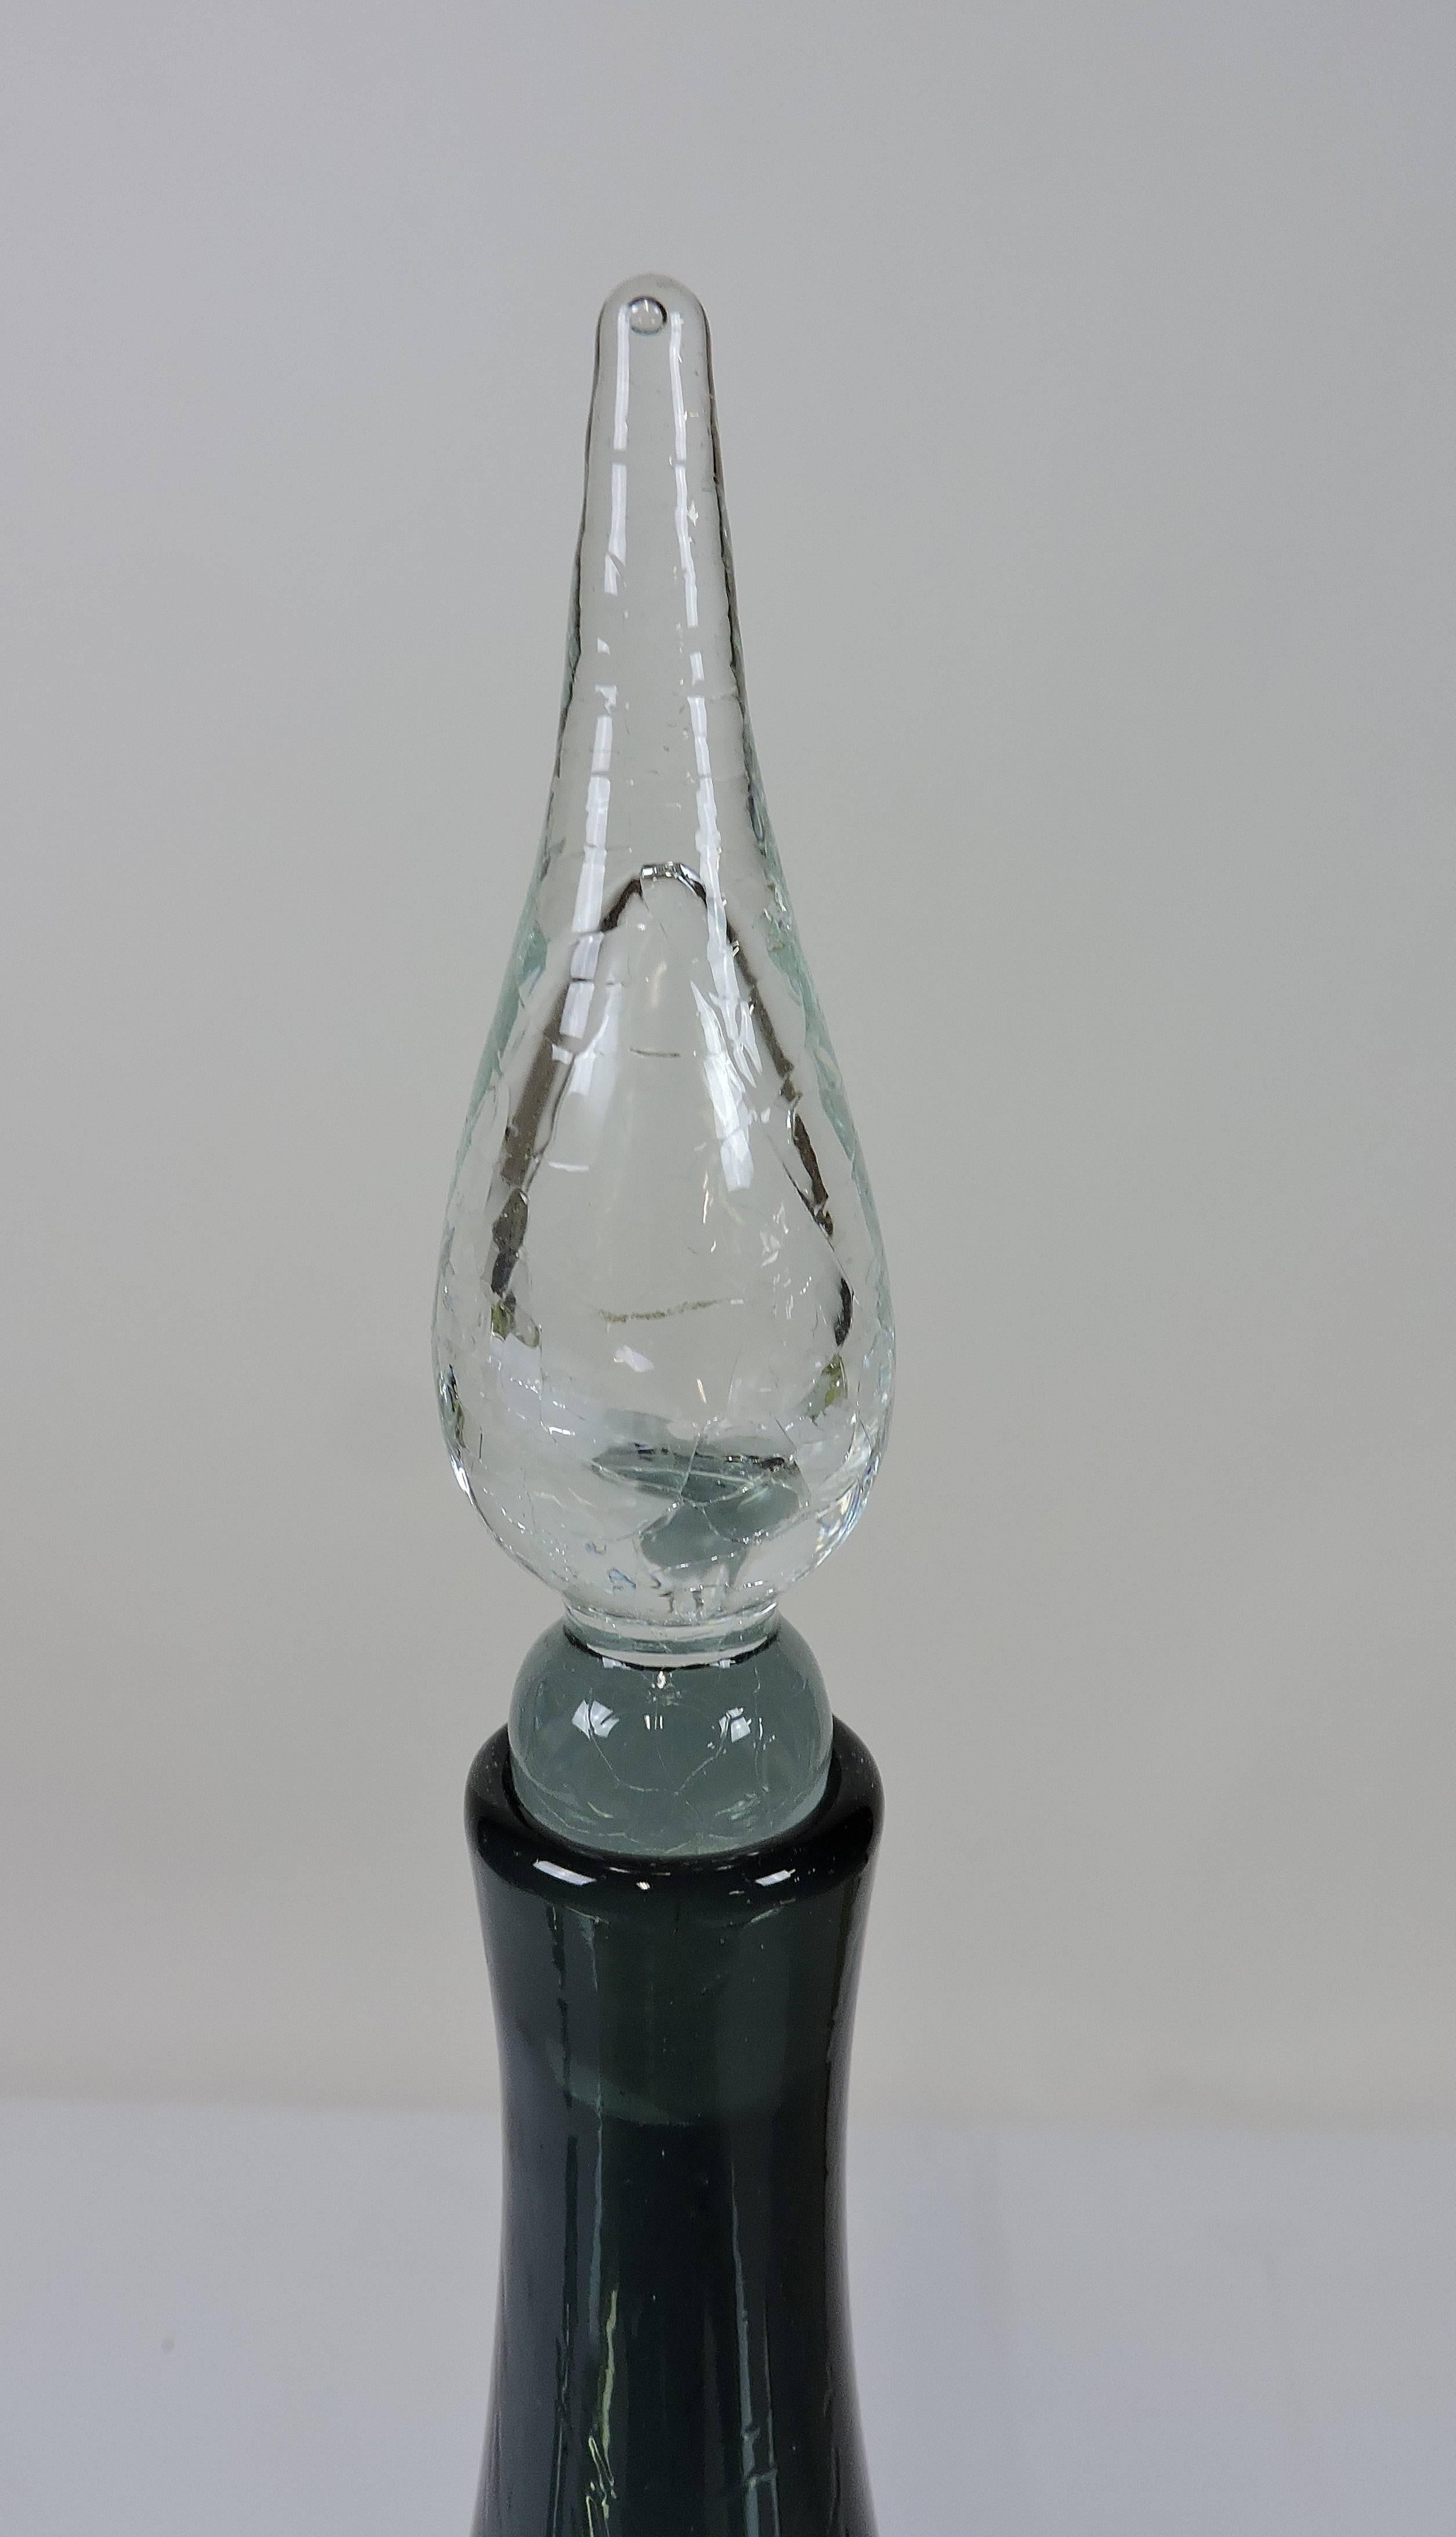 Beautiful handblown charcoal color crackle glass decanter with a clear stopper. Designed by Winslow Andersen and manufactured by Blenko Glass in W. Virginia in the 1950s.